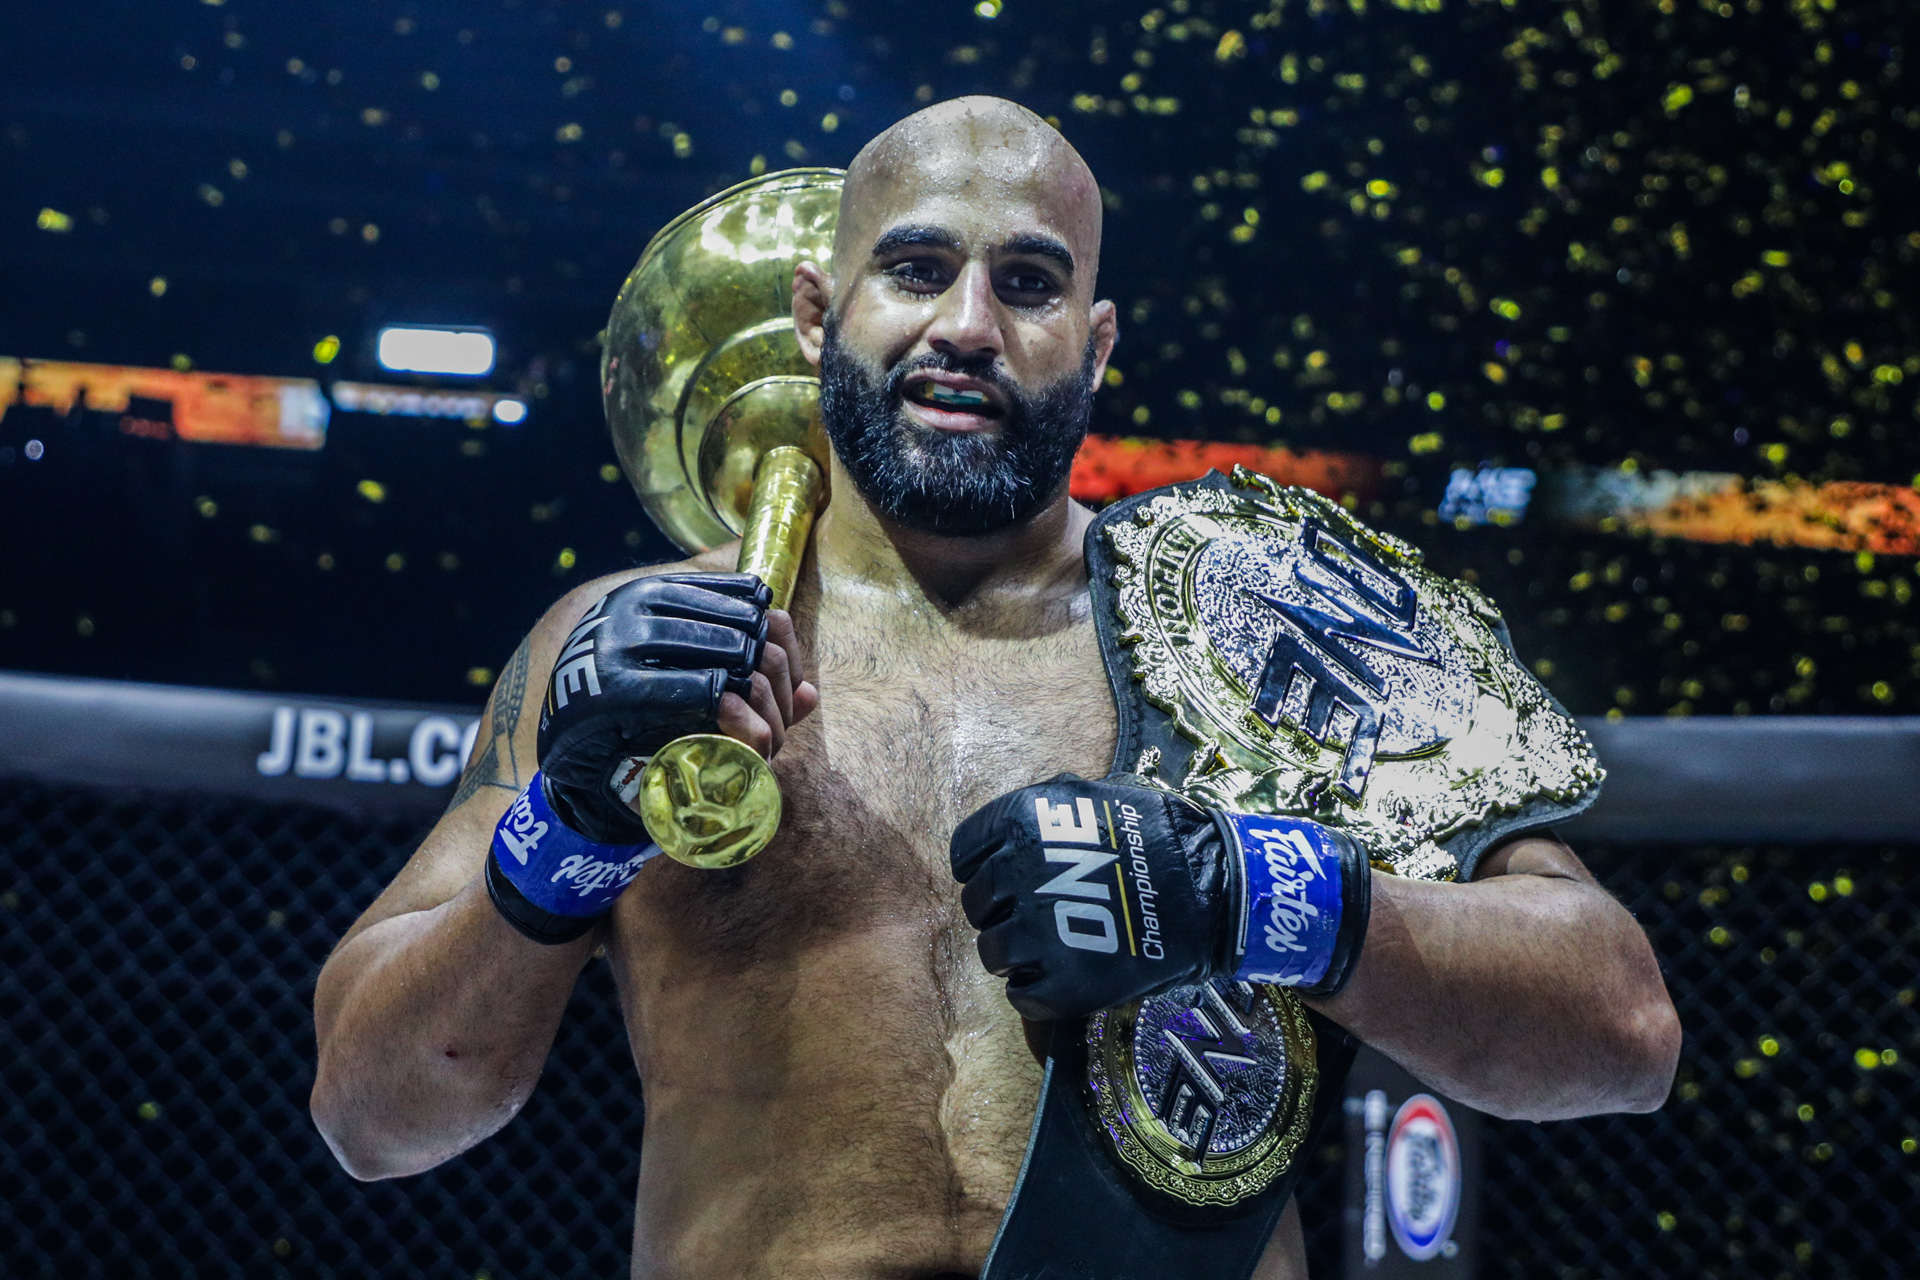 Scenes from the ONE Heavyweight World Title fight between Arjan Bhullar and Brandon Vera at ONE: DANGAL on 15 May